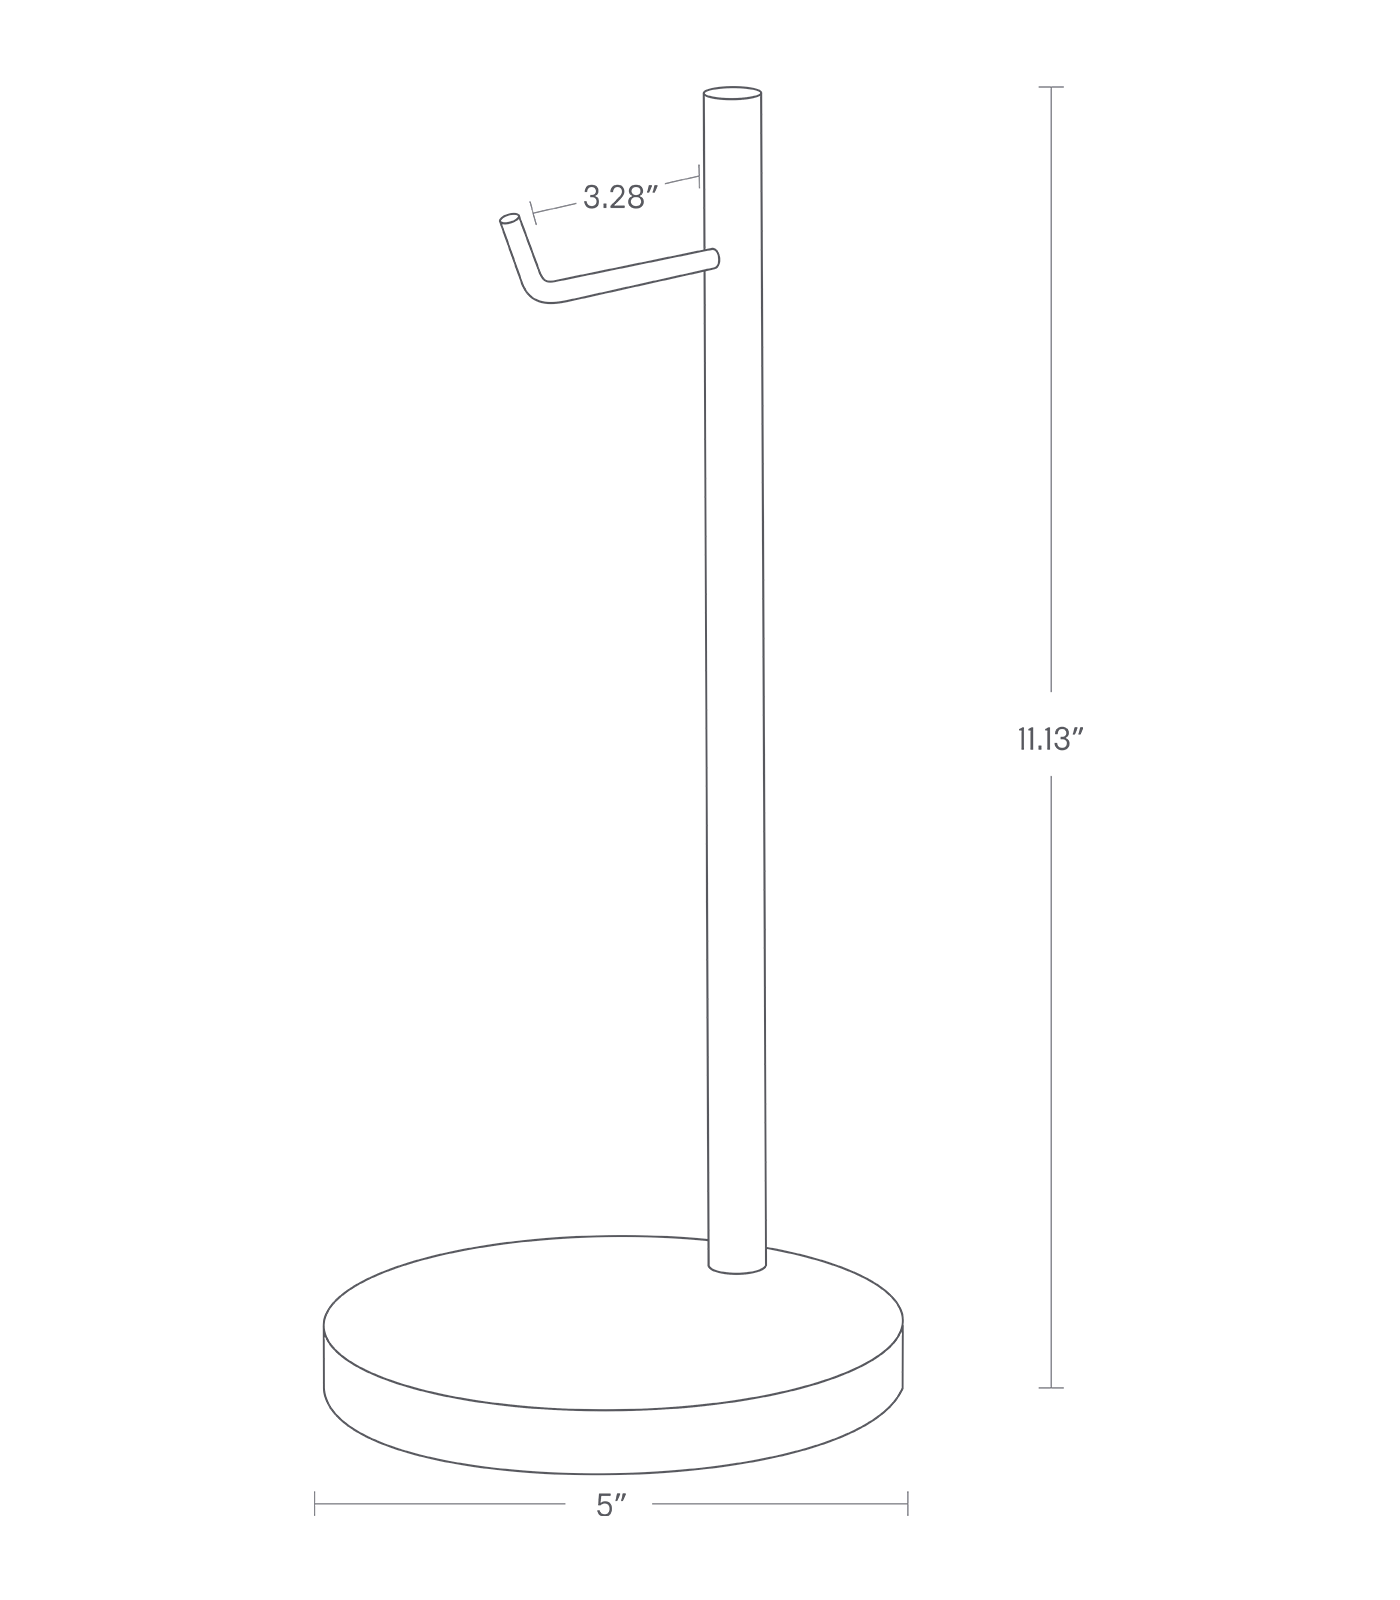 Dimension image for Headphone Stand showing base diameter of 5